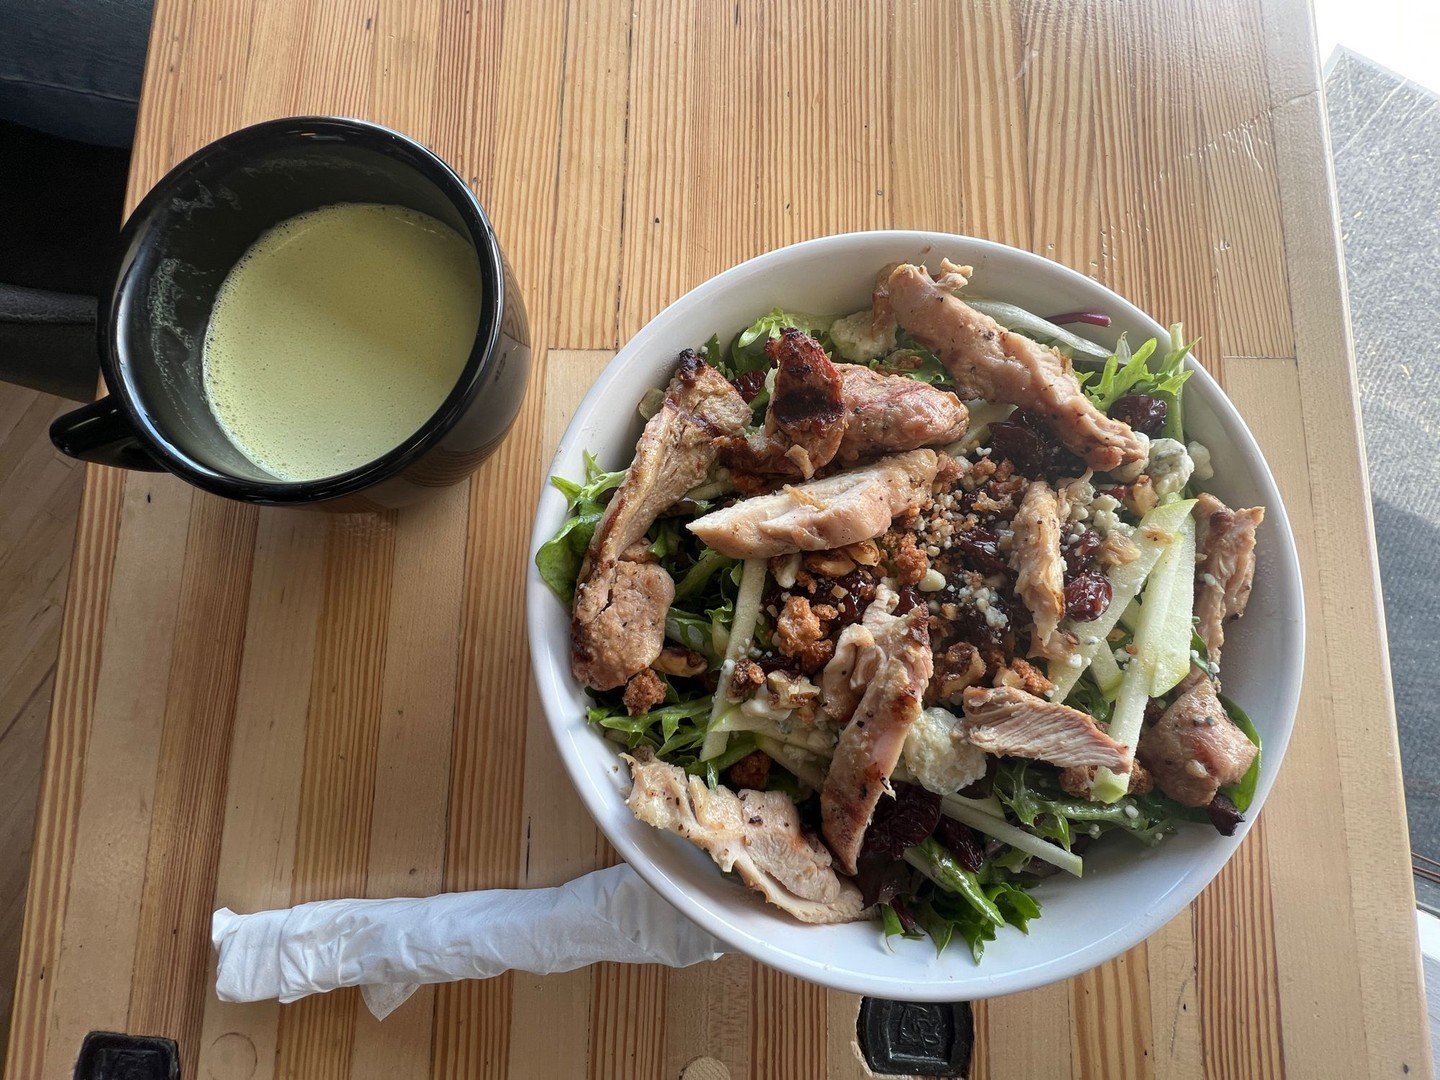 Fresh twist on a classic! 🥗. Tiny's Coffee Bar introduces the Michigan Salad with roasted chicken - mixed greens, juicy chicken, crispy apples, and tangy feta cheese, all tossed together with a delicious dressing and dried cherries. 

Stop by for a 